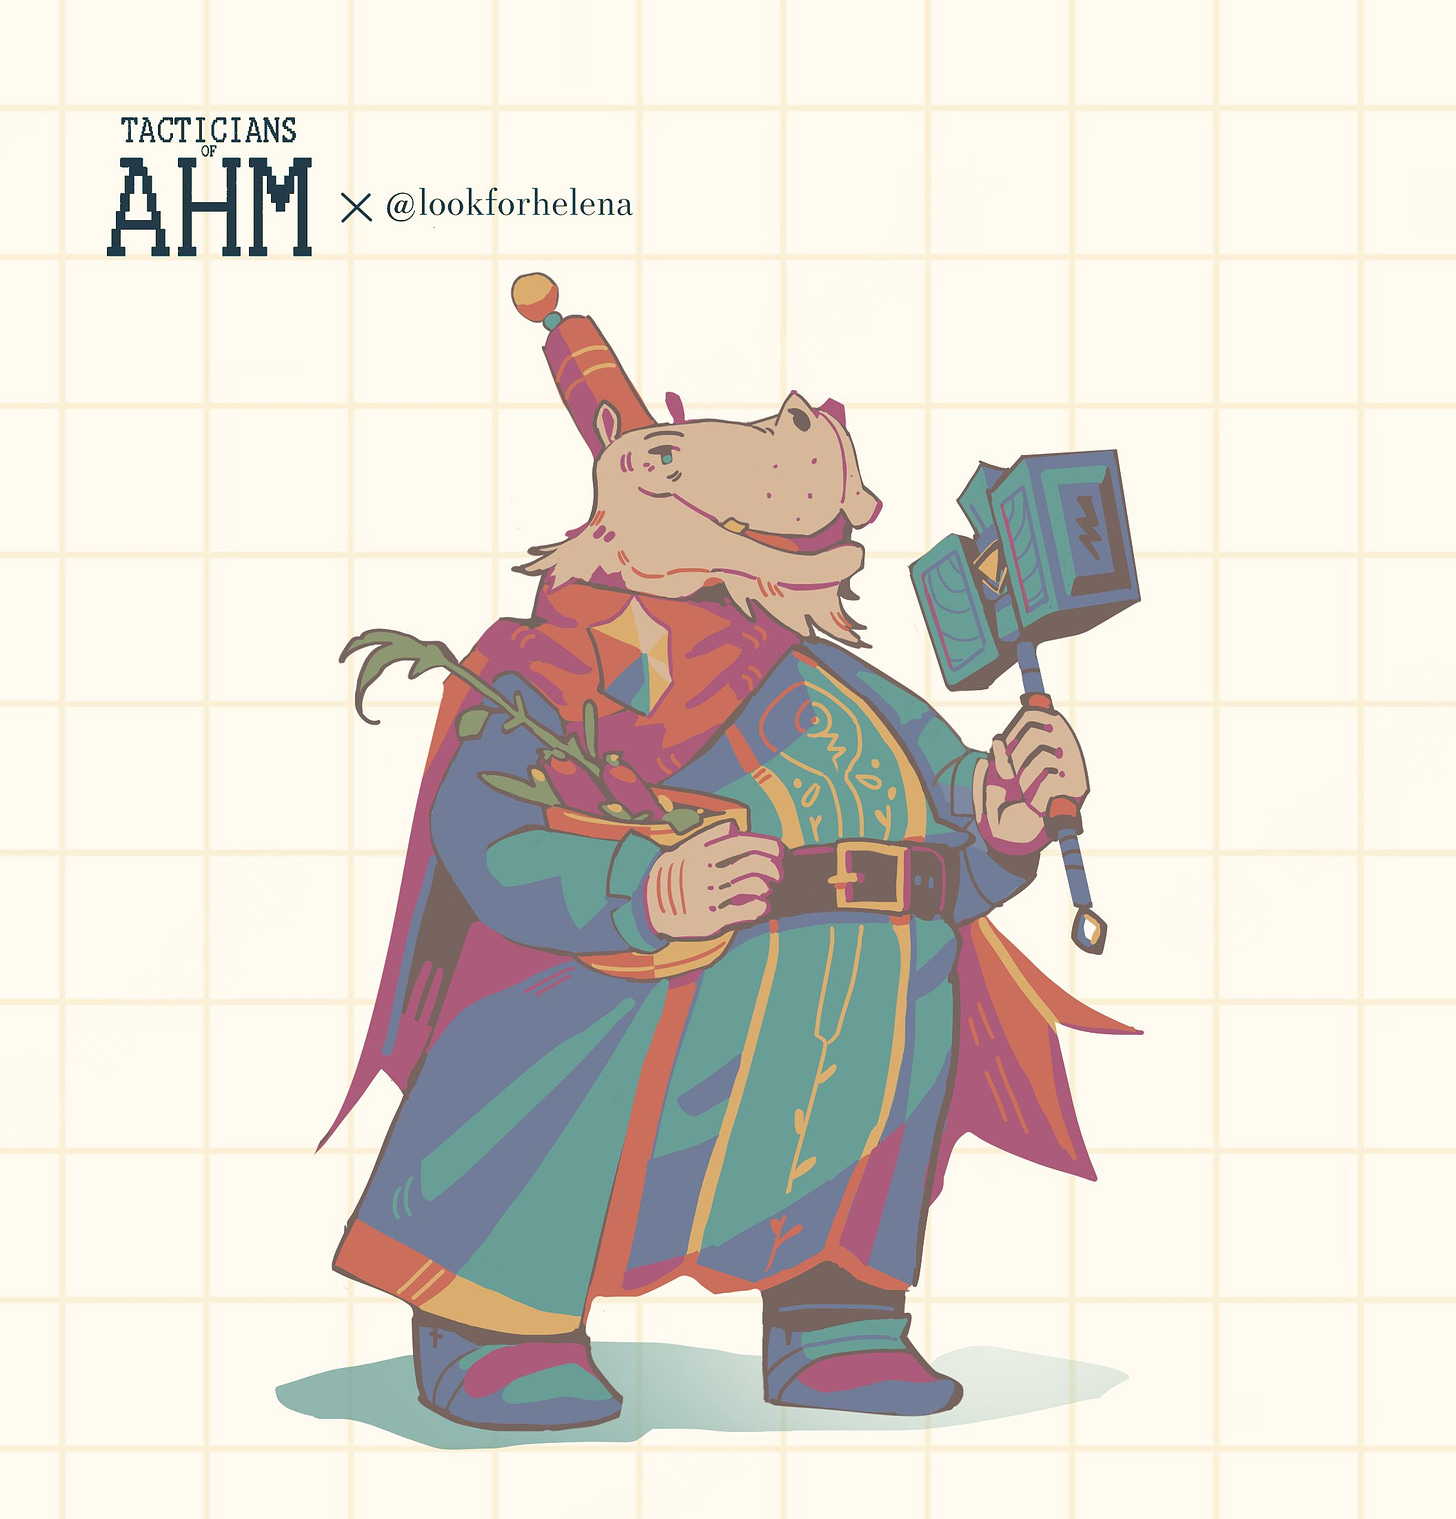 A big and burly, pudgy hippofolk man in turquoise and gold cleric robes with a cape and Tactician's crest (and a little fez hat) wielding a big storm-themed warhammer and carrying a basket of fresh veggies (including several eggplants)